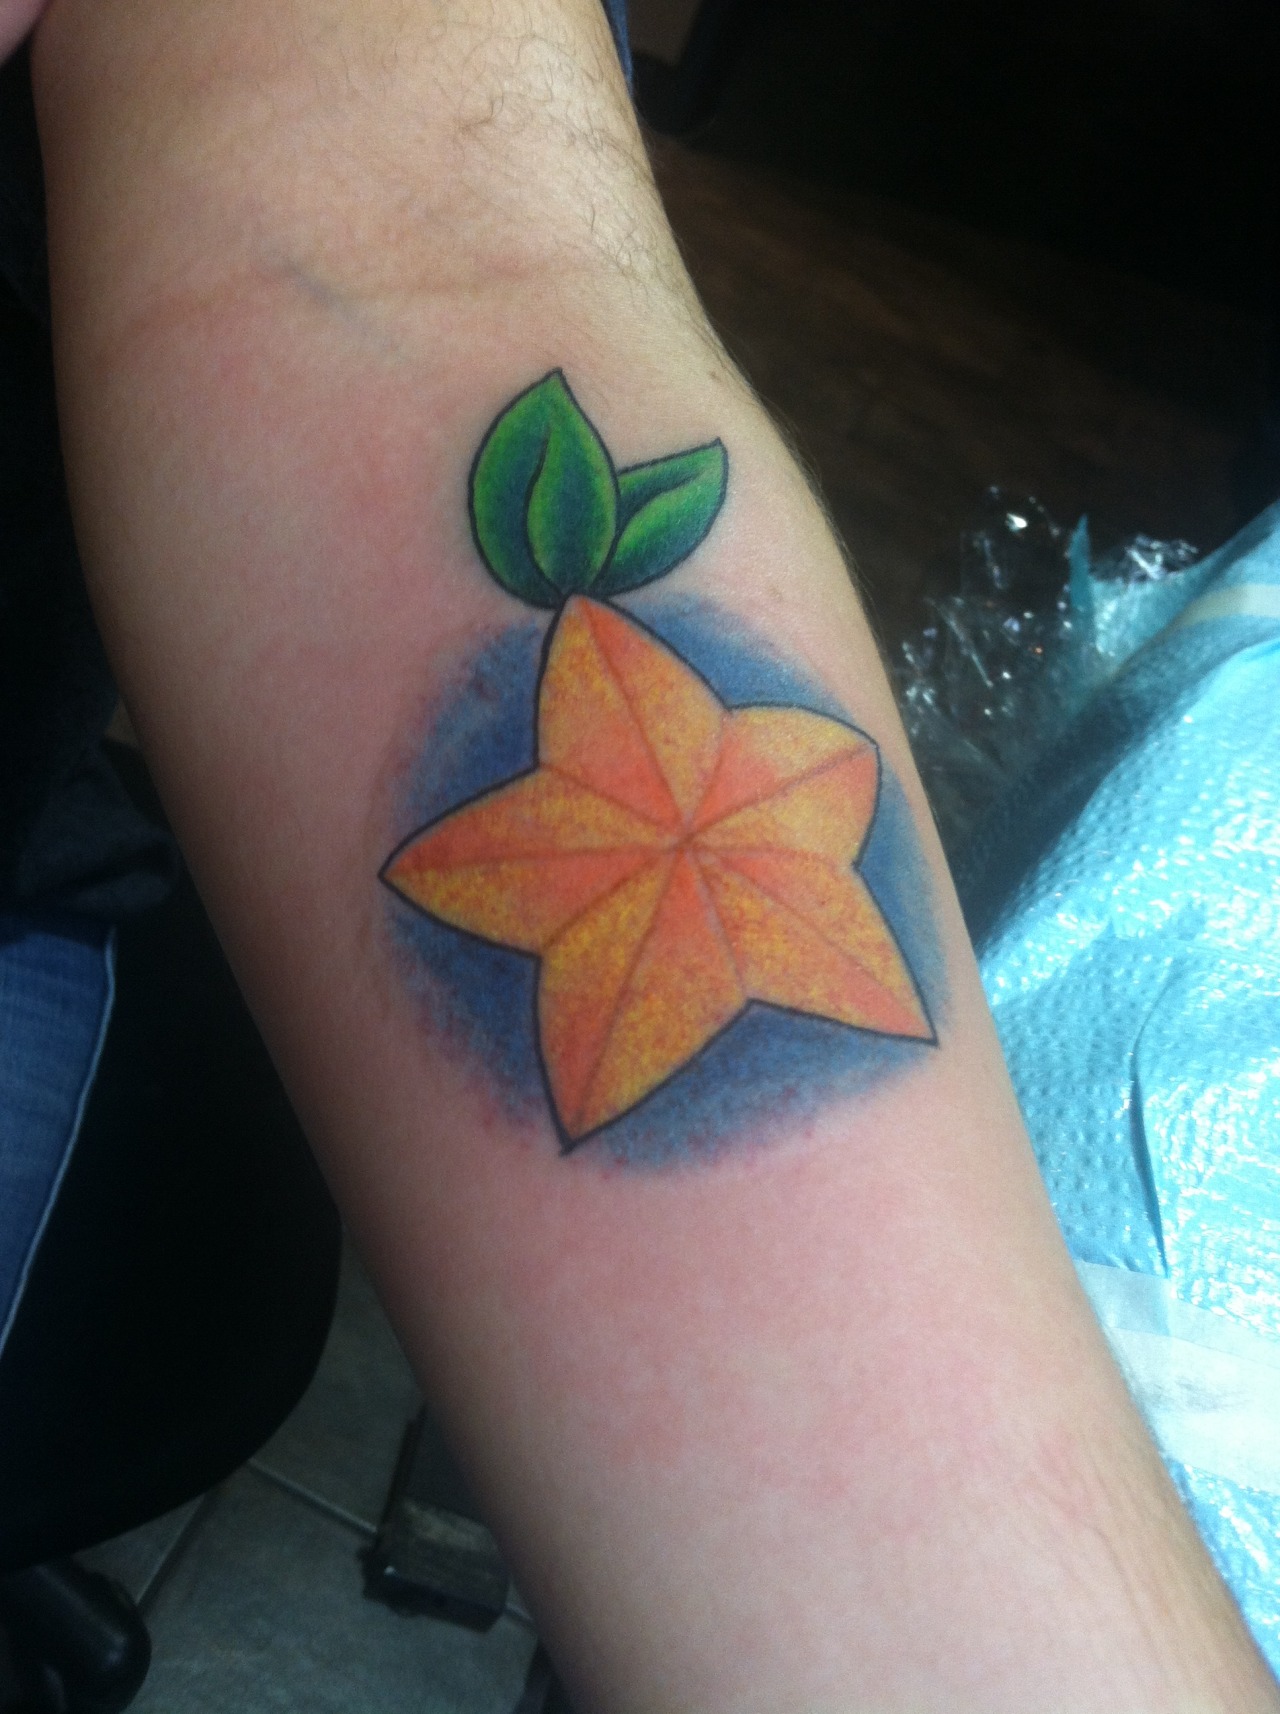 My bestie and I finally got our paopu fruit tattoos from Kingdom Hearts  If two people share paopu fruit their d  Kingdom hearts tattoo Tattoos  Couple tattoos